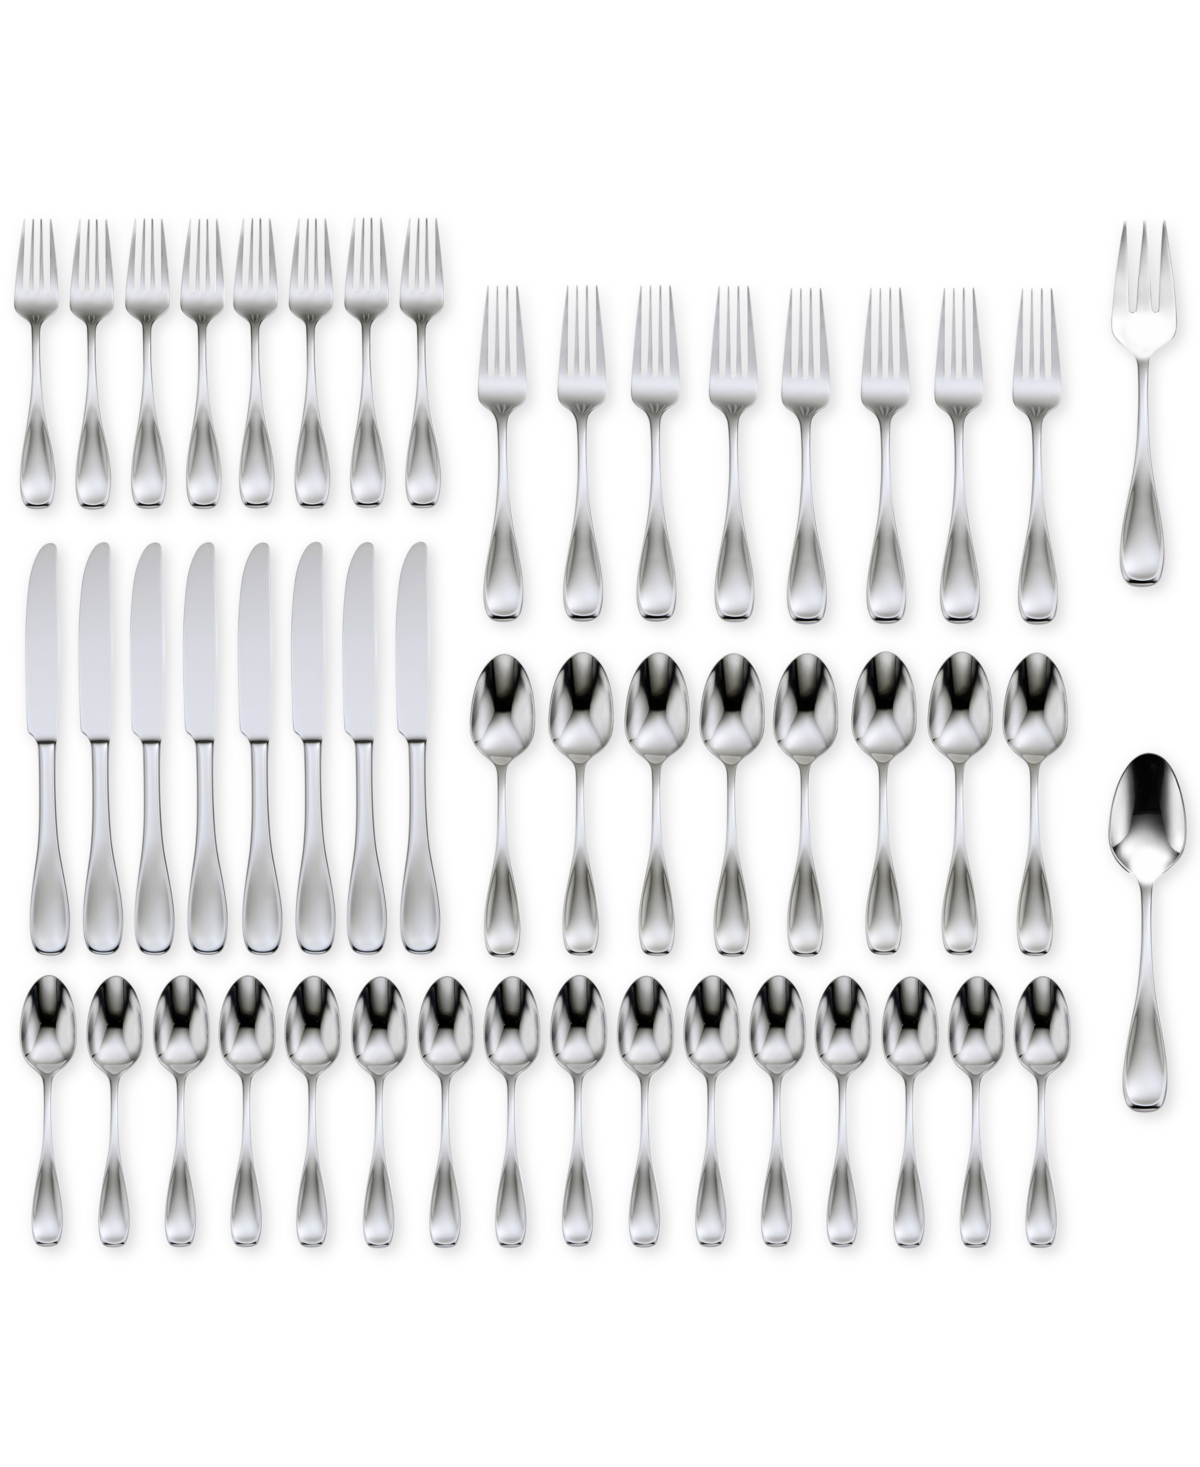 Oneida Voss 50-Pc Flatware Set, Service for 8, Created for Macy's